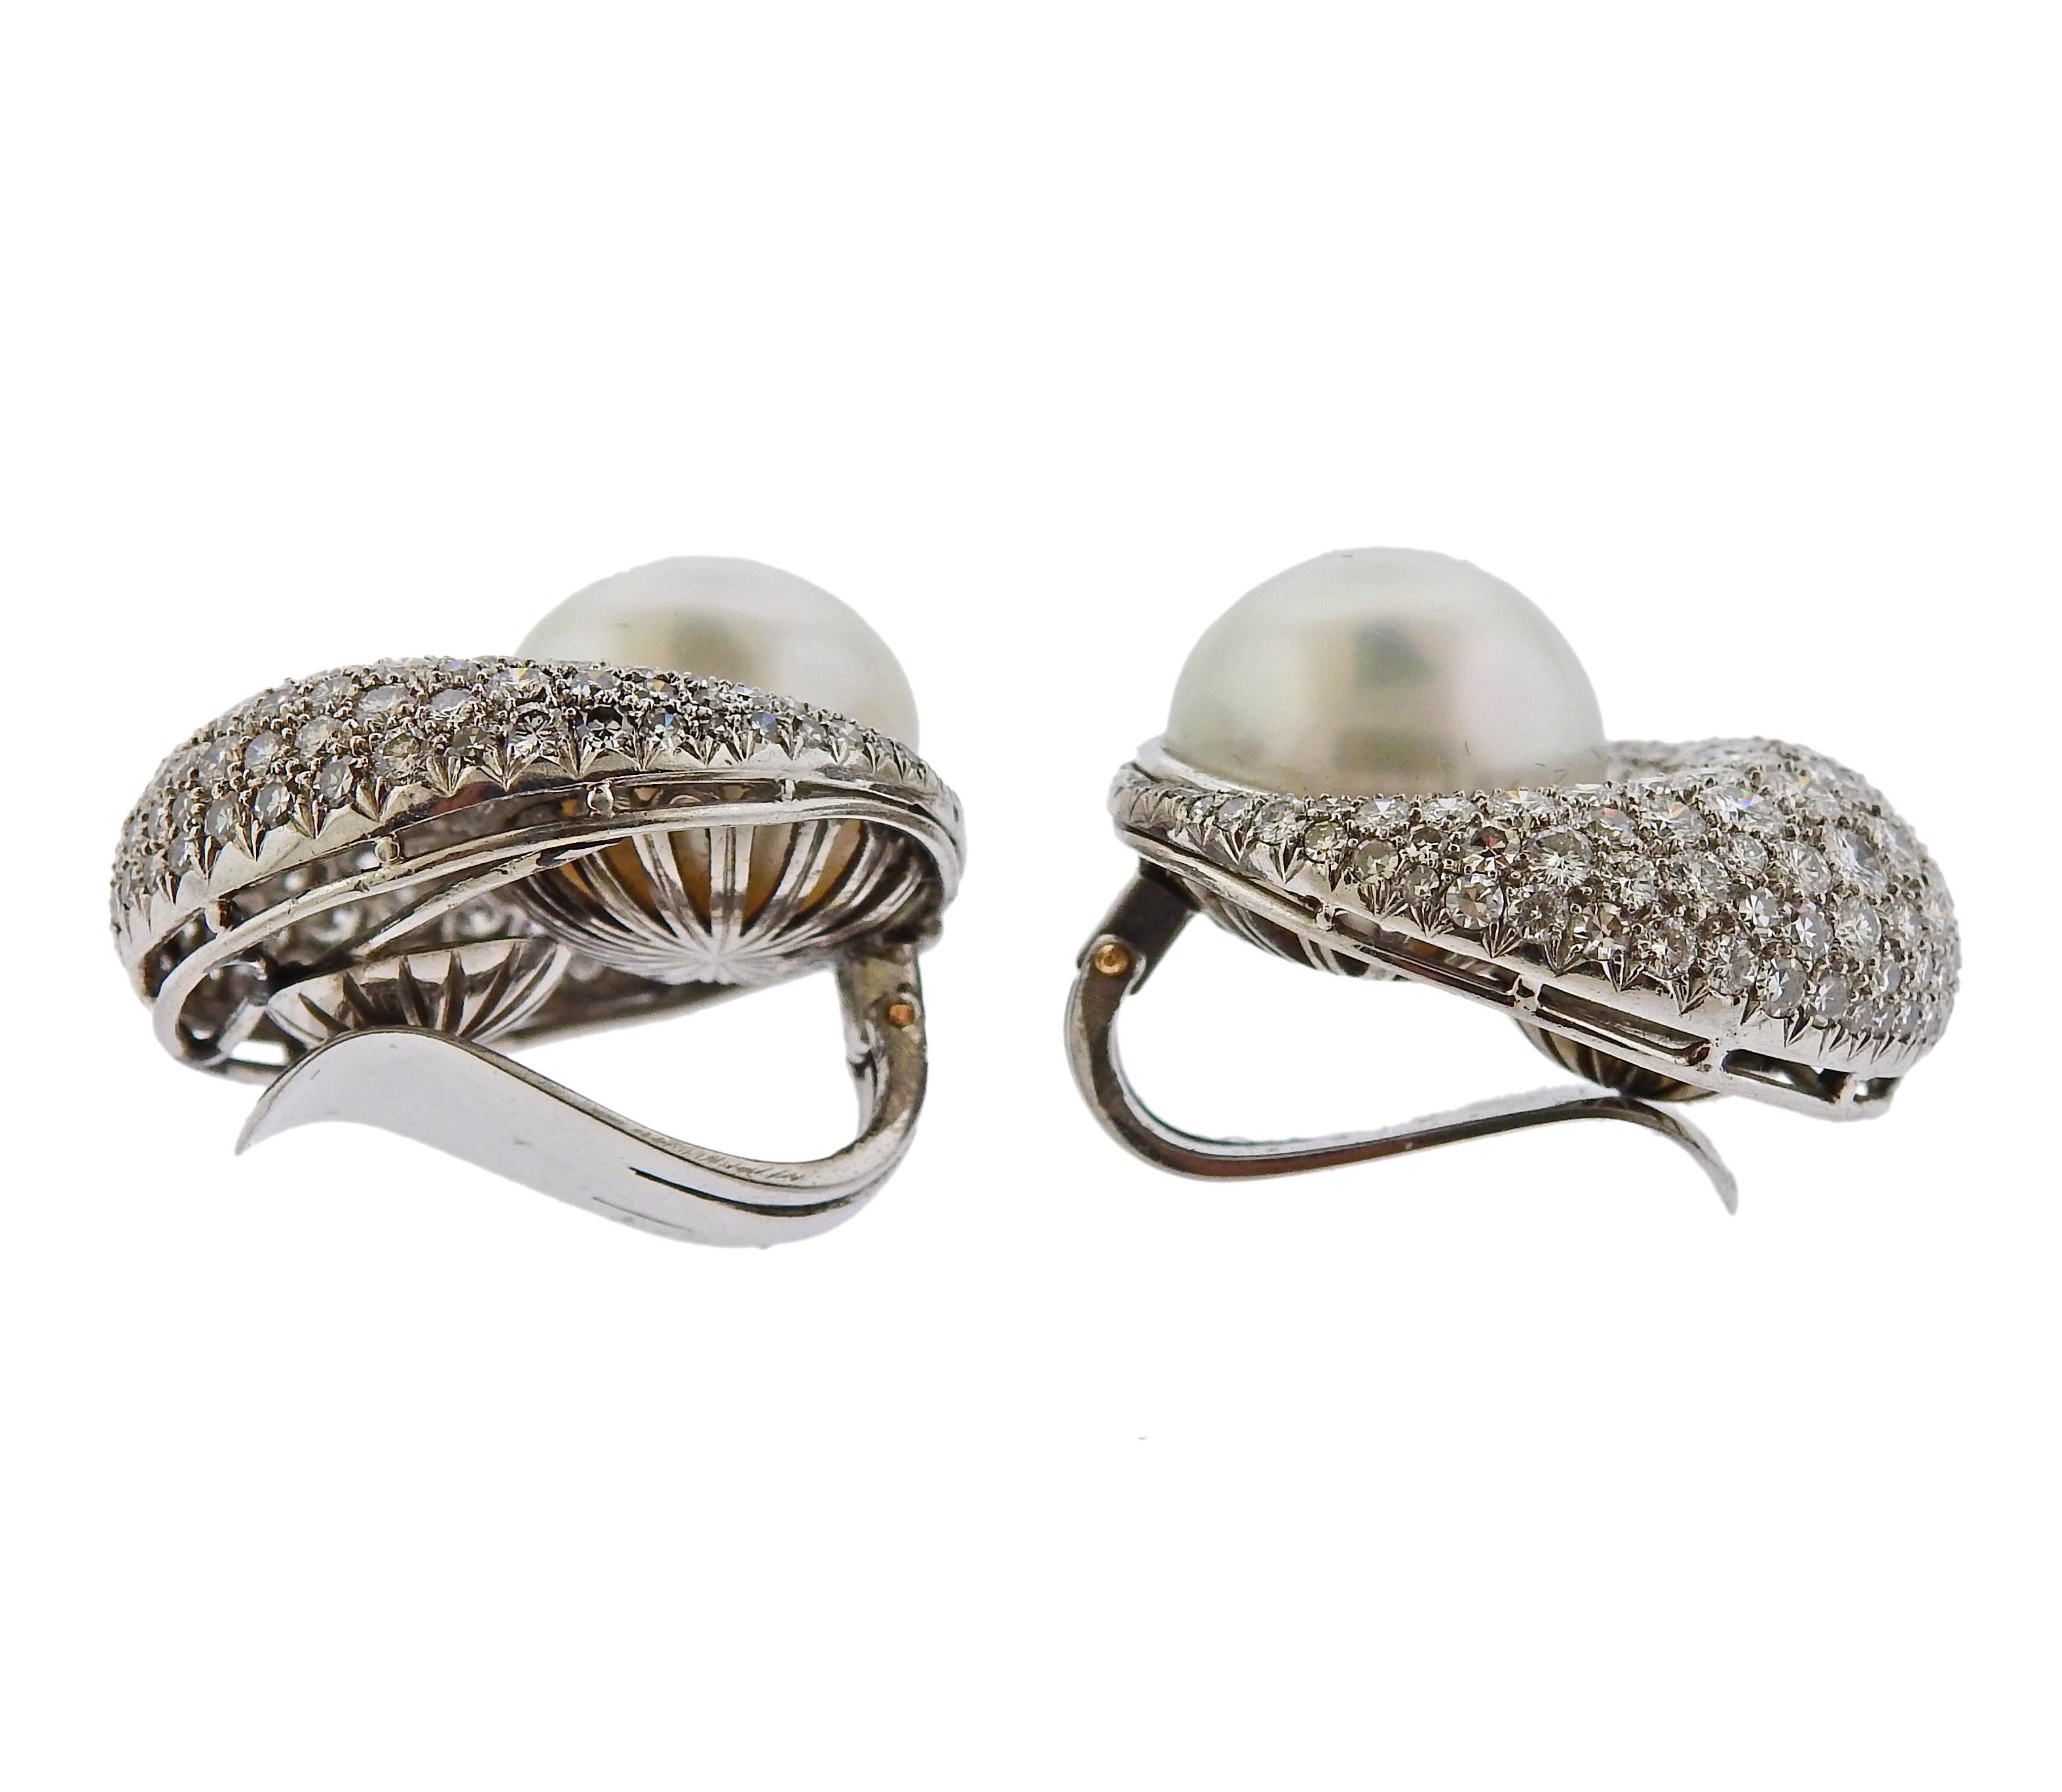 Pair of large platinum earrings, featuring 13.5mm South Sea pearls, surrounded with a total of approx. 6 carats in diamonds. Earrings are 25nn in diameter. Tested platinum, weigh 29 grams.

SKU#E-02687